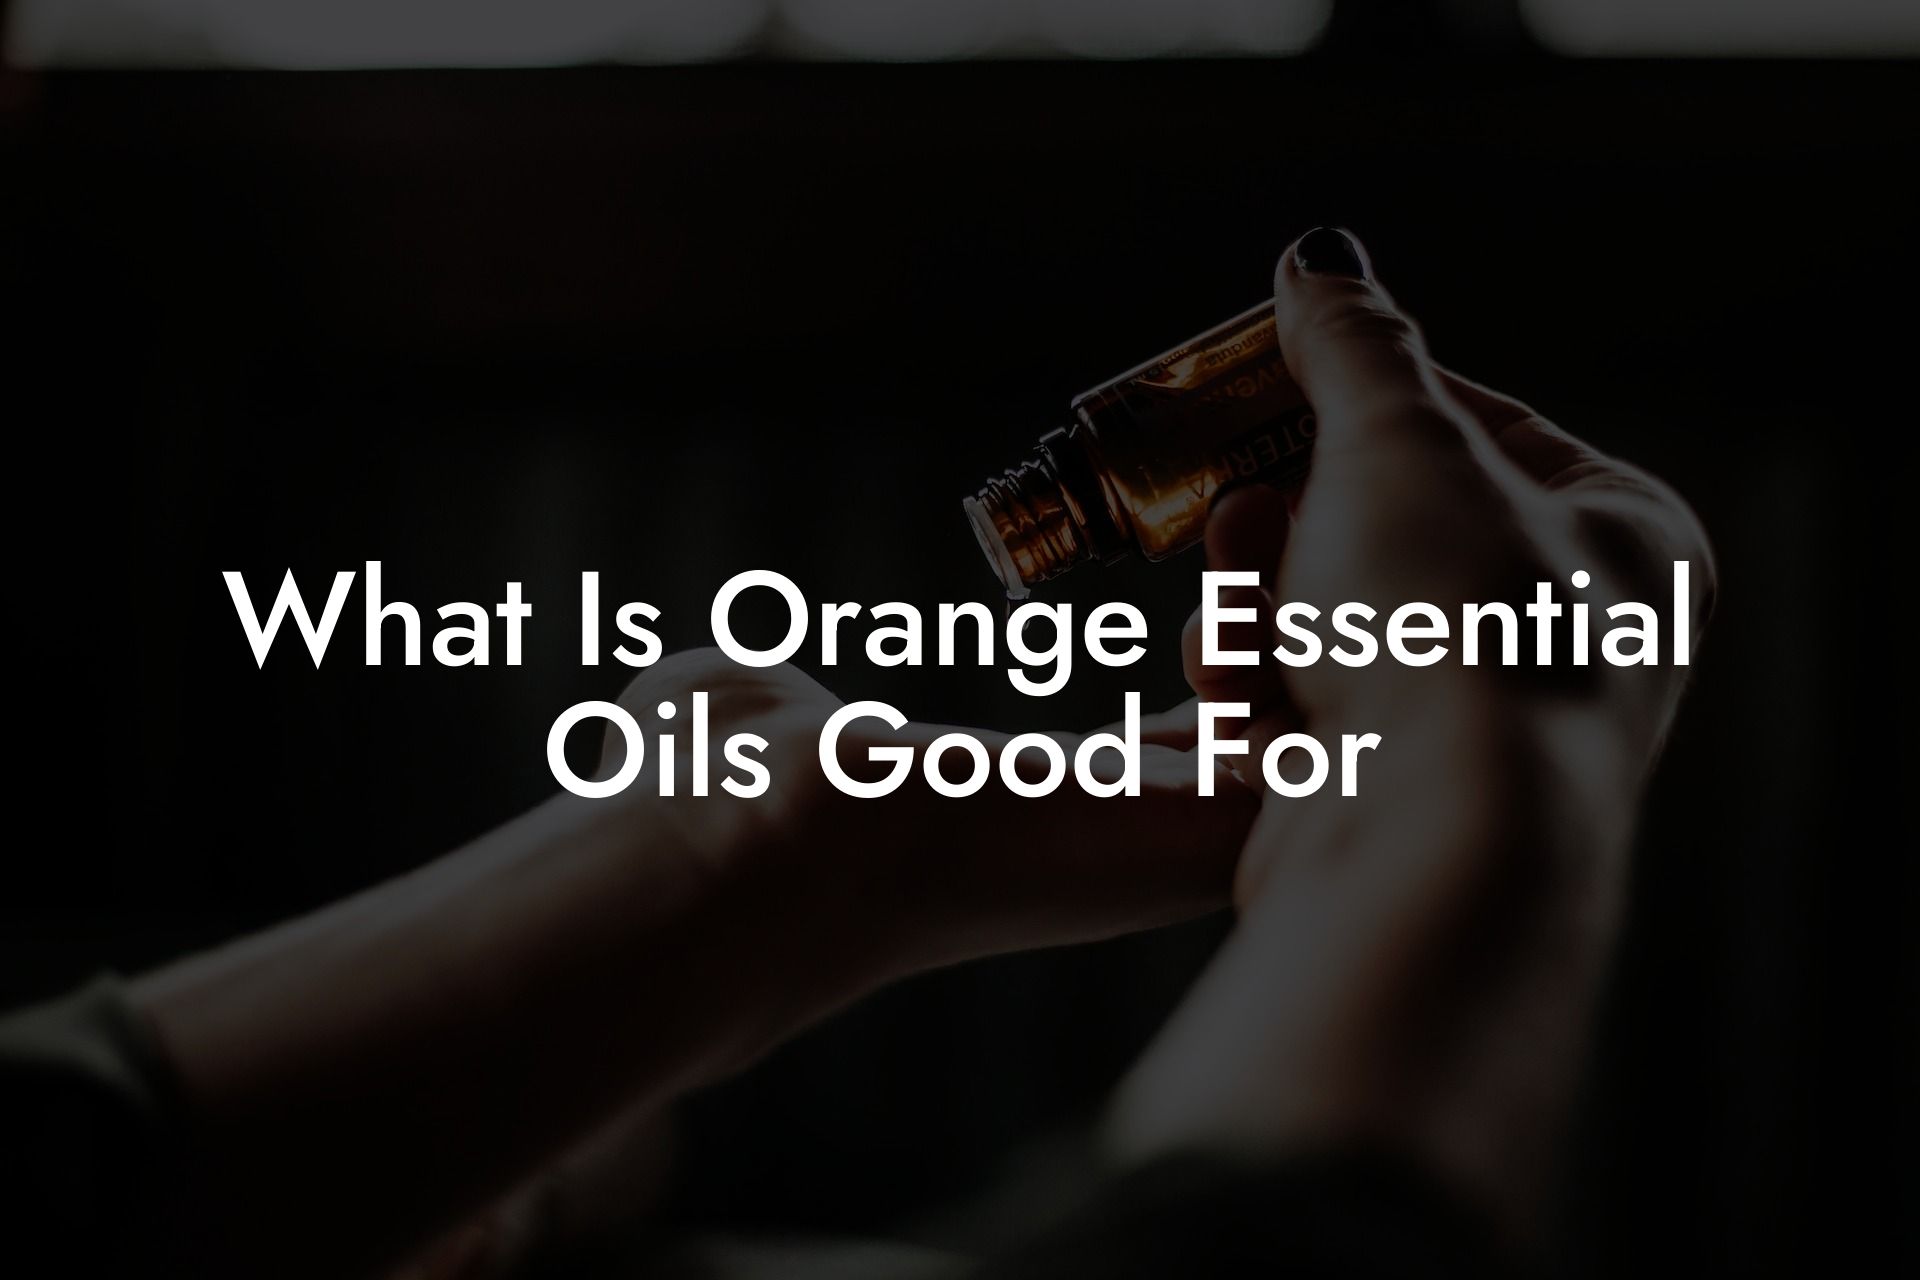 What Is Orange Essential Oils Good For